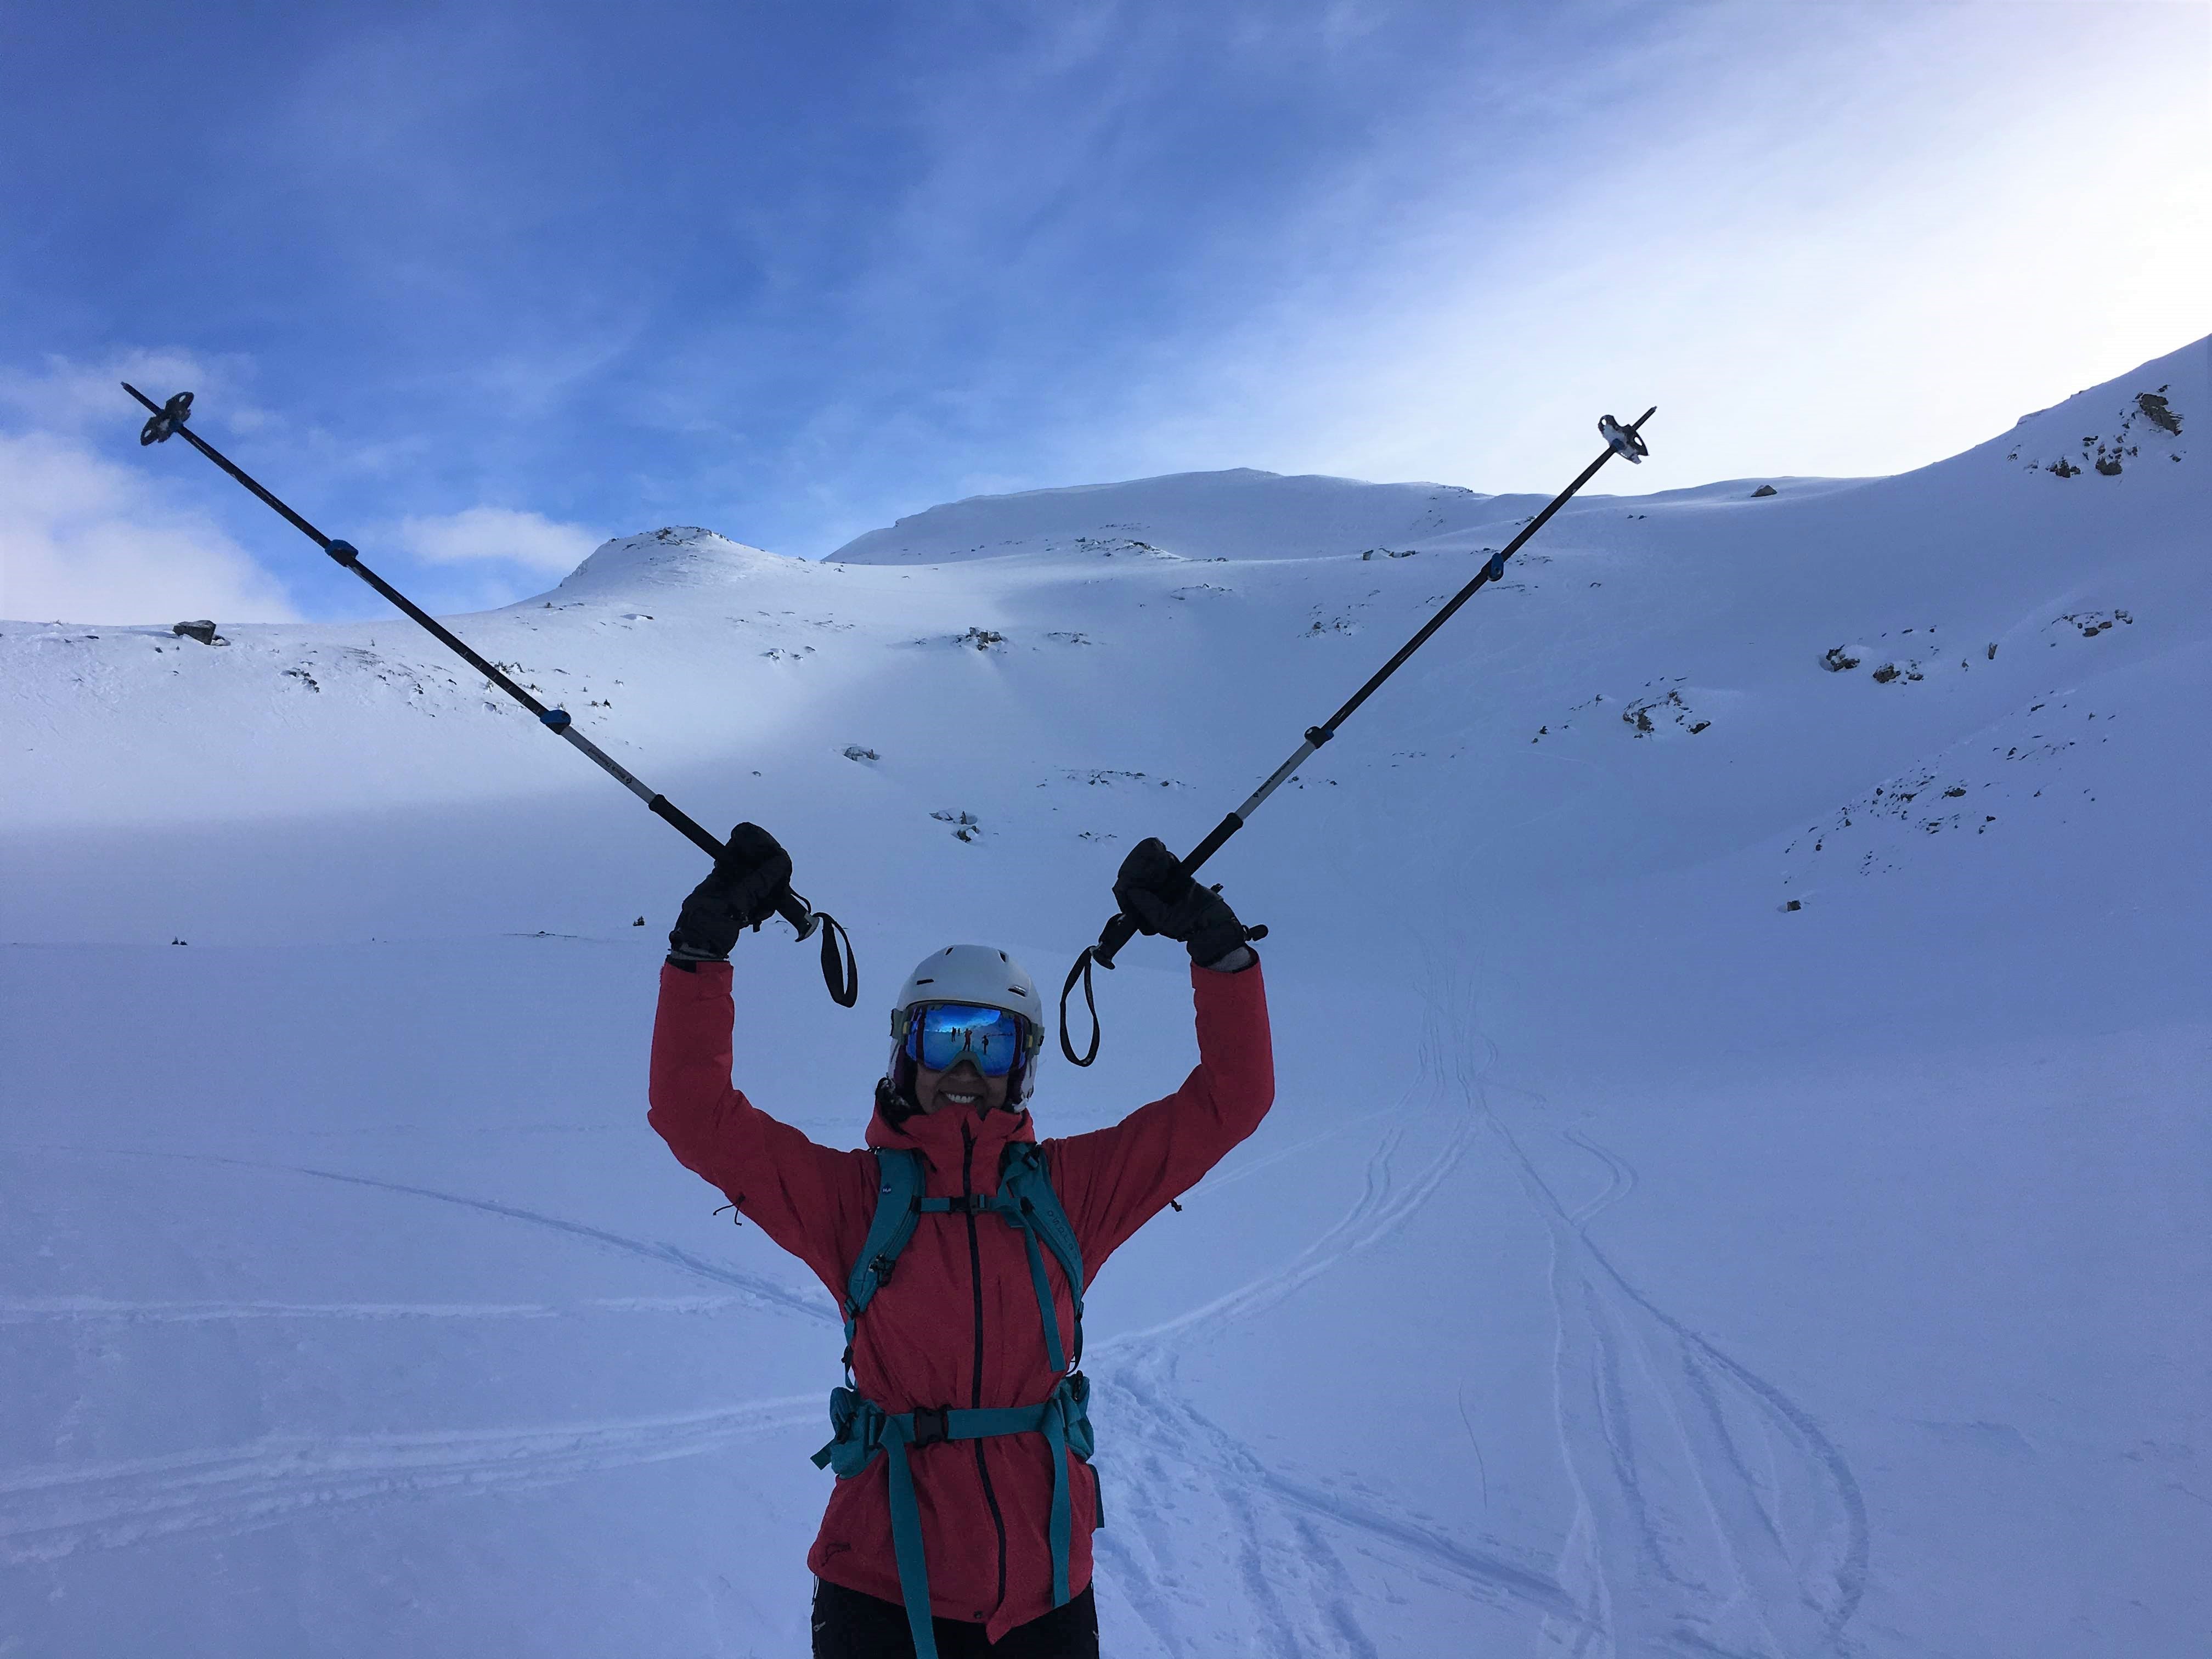 Happy skier at the end of a ski touring run - a great accomplishment